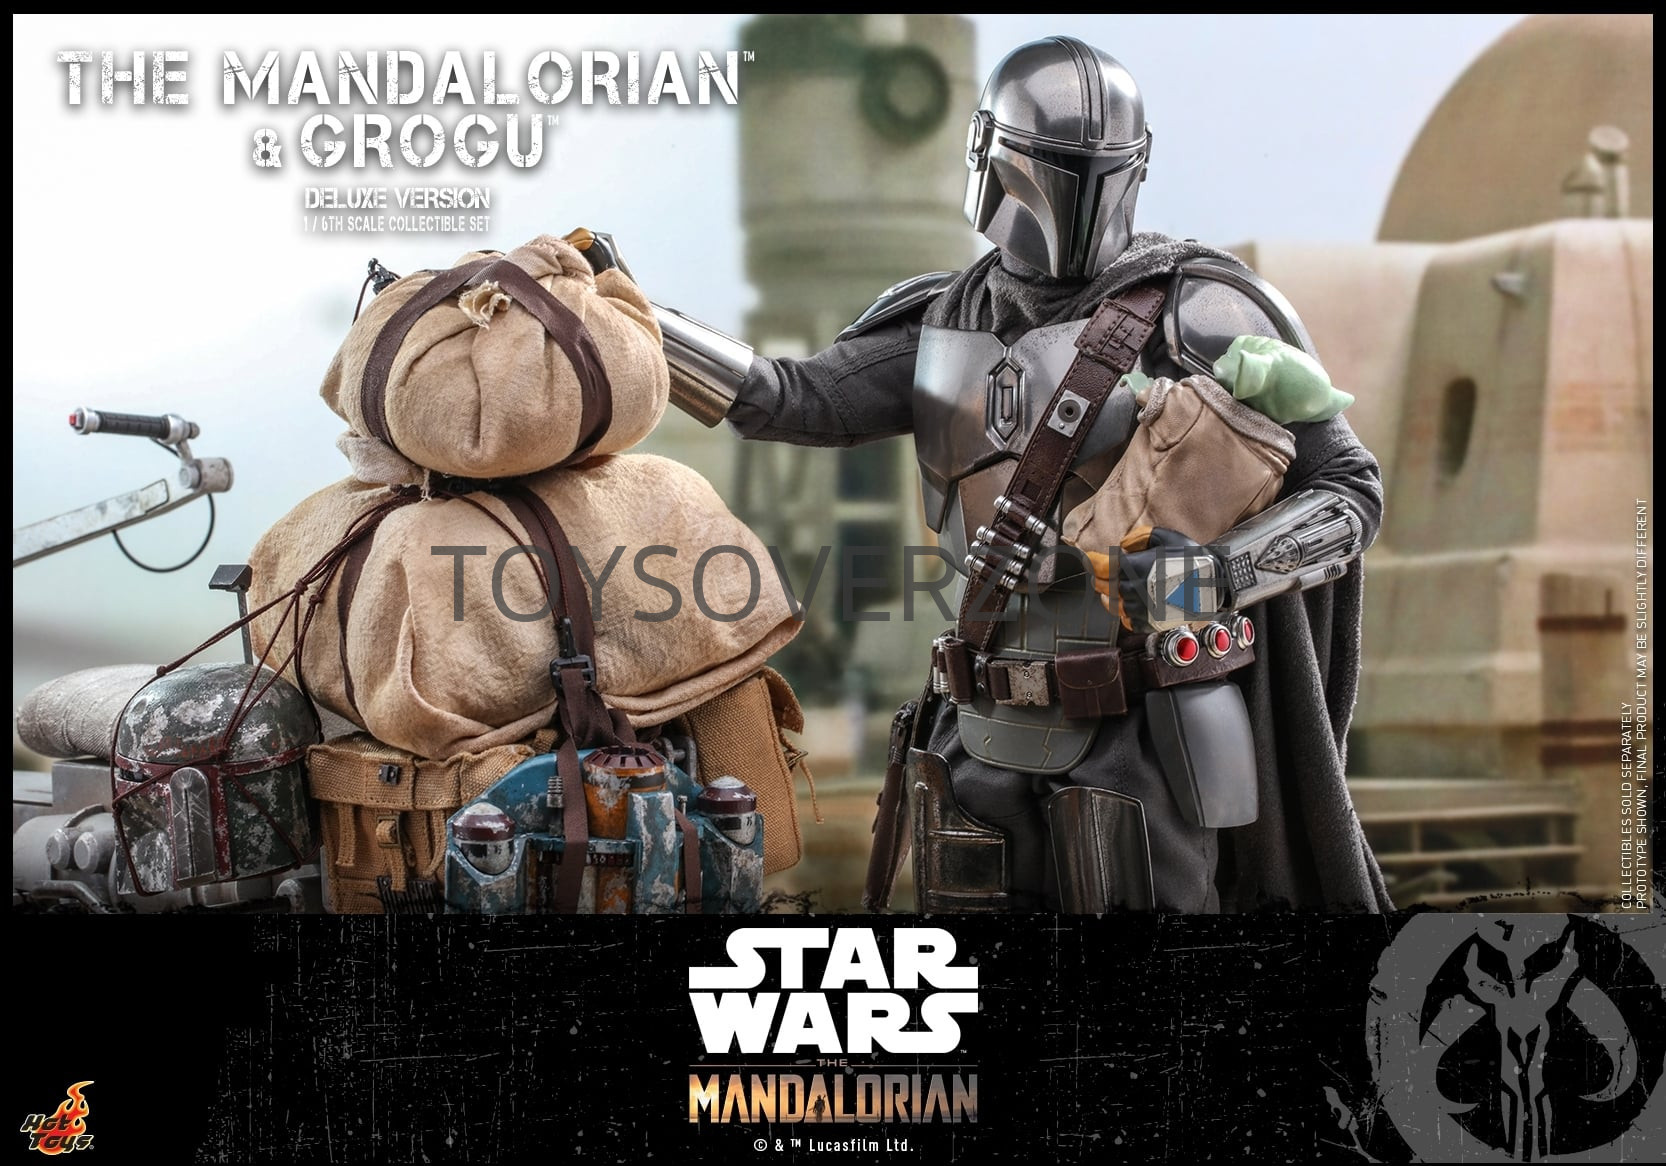 Hot Toys Tms052 The Mandalorian 1 6th Scale The Mandalorian And